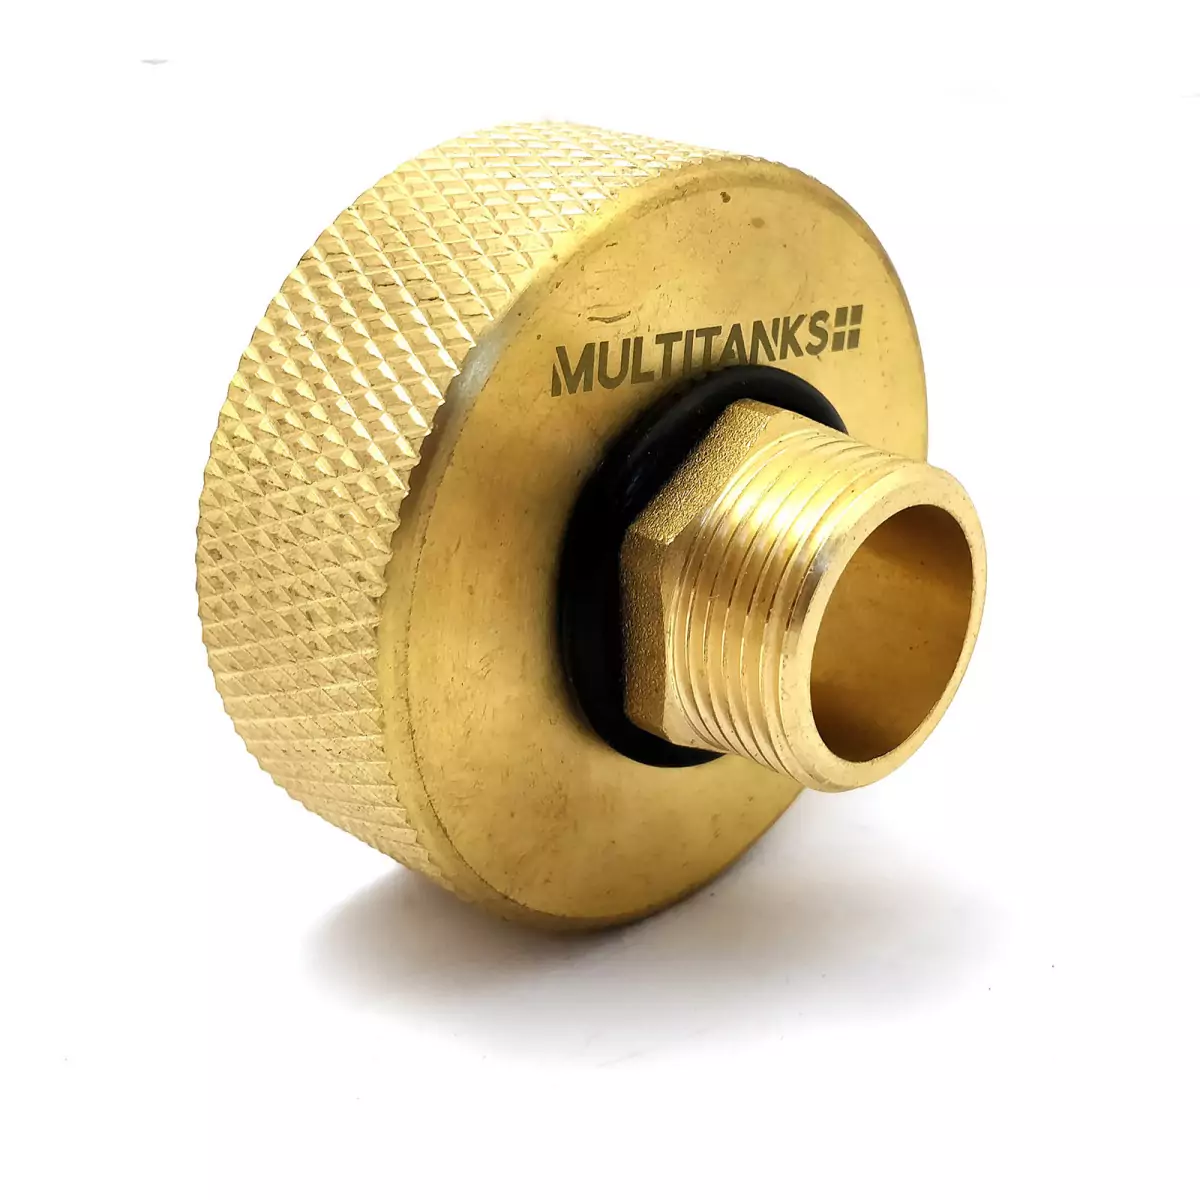 S60x6 Connector - 3/4 Inch Male Threaded Bit All Brass